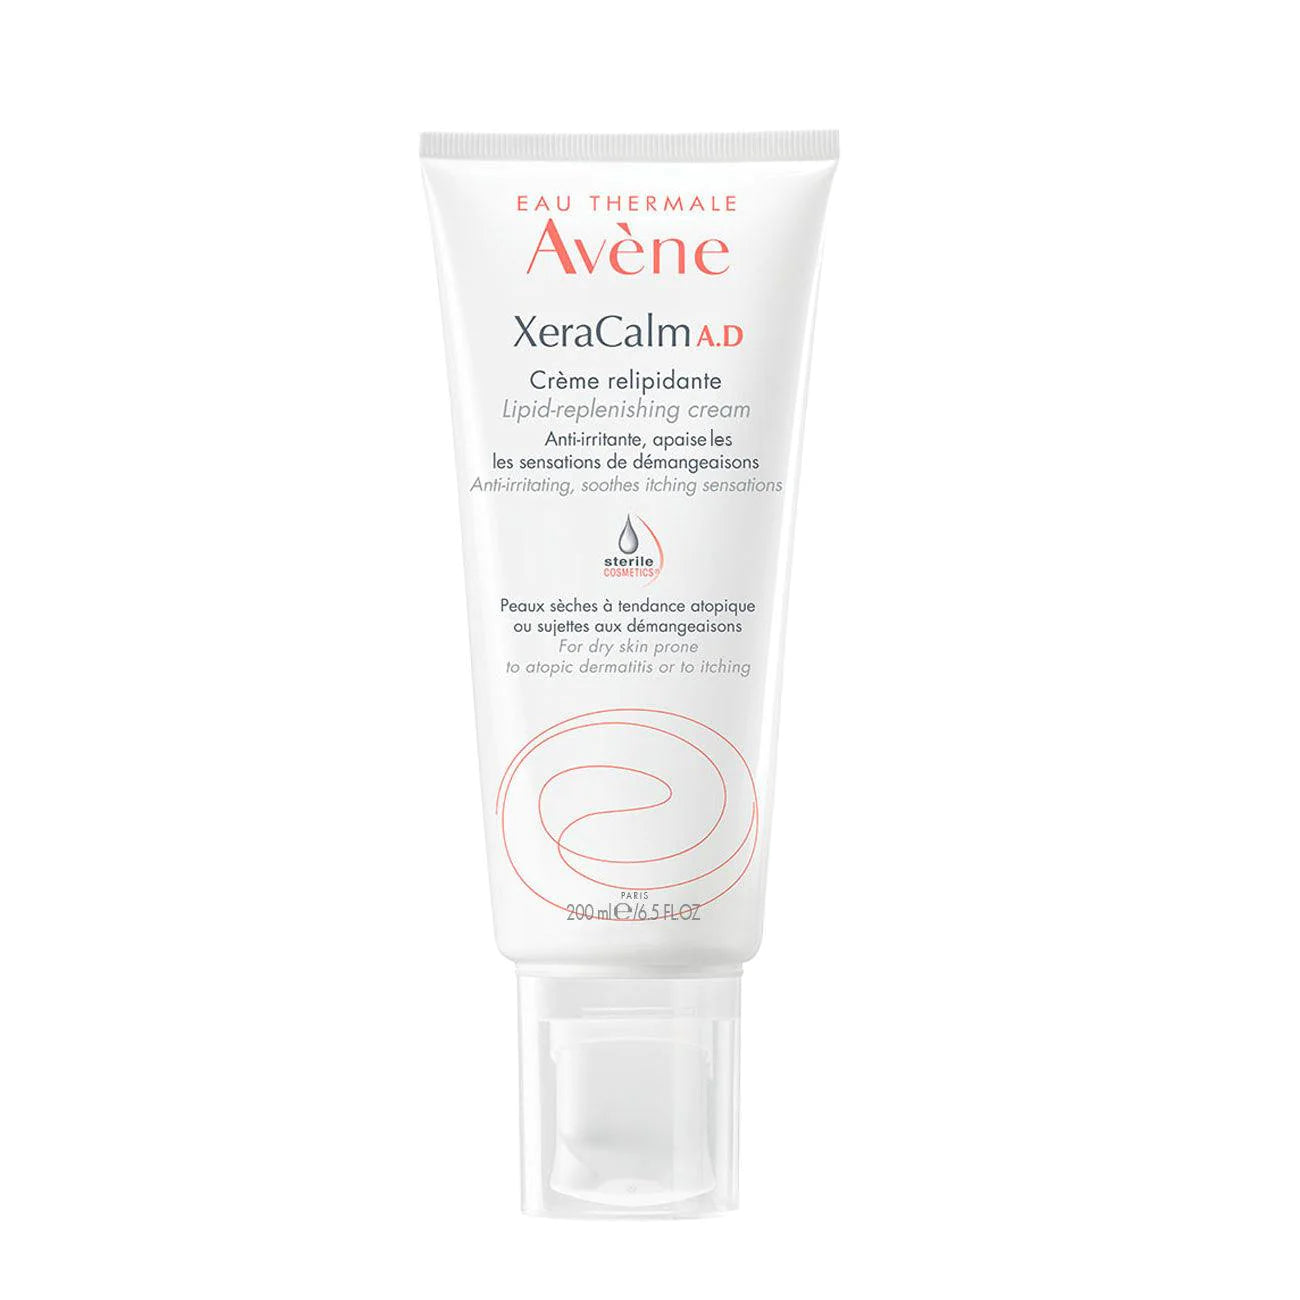 AVÈNE XeraCalm A.D Lipid Replenishing Cream for Dry Skin Prone to Atopic Dermatitis or Itching